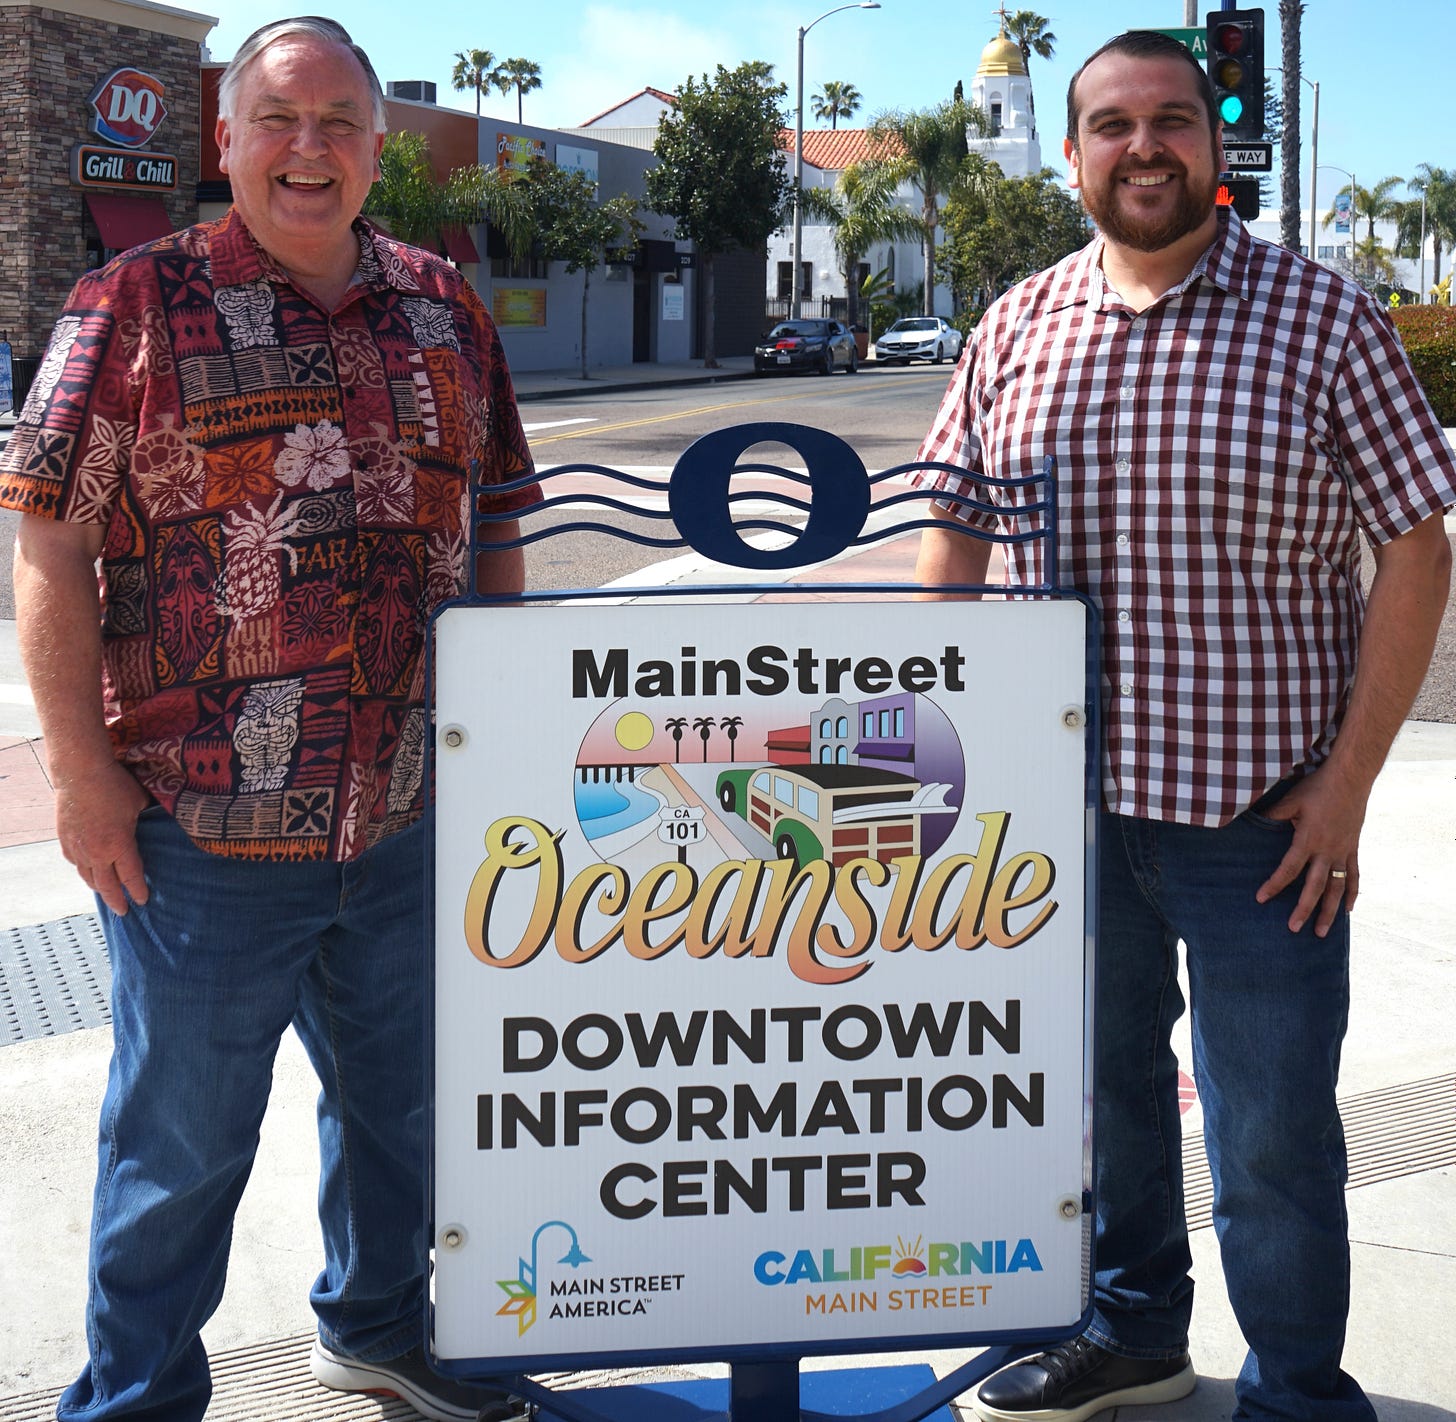 Rick Wright, left, retired as the chief executive officer of the Oceanside MainStreet organization earlier this month. Gumaro Escrcega, right, takes over to lead the nonprofit into the future. Courtesy image